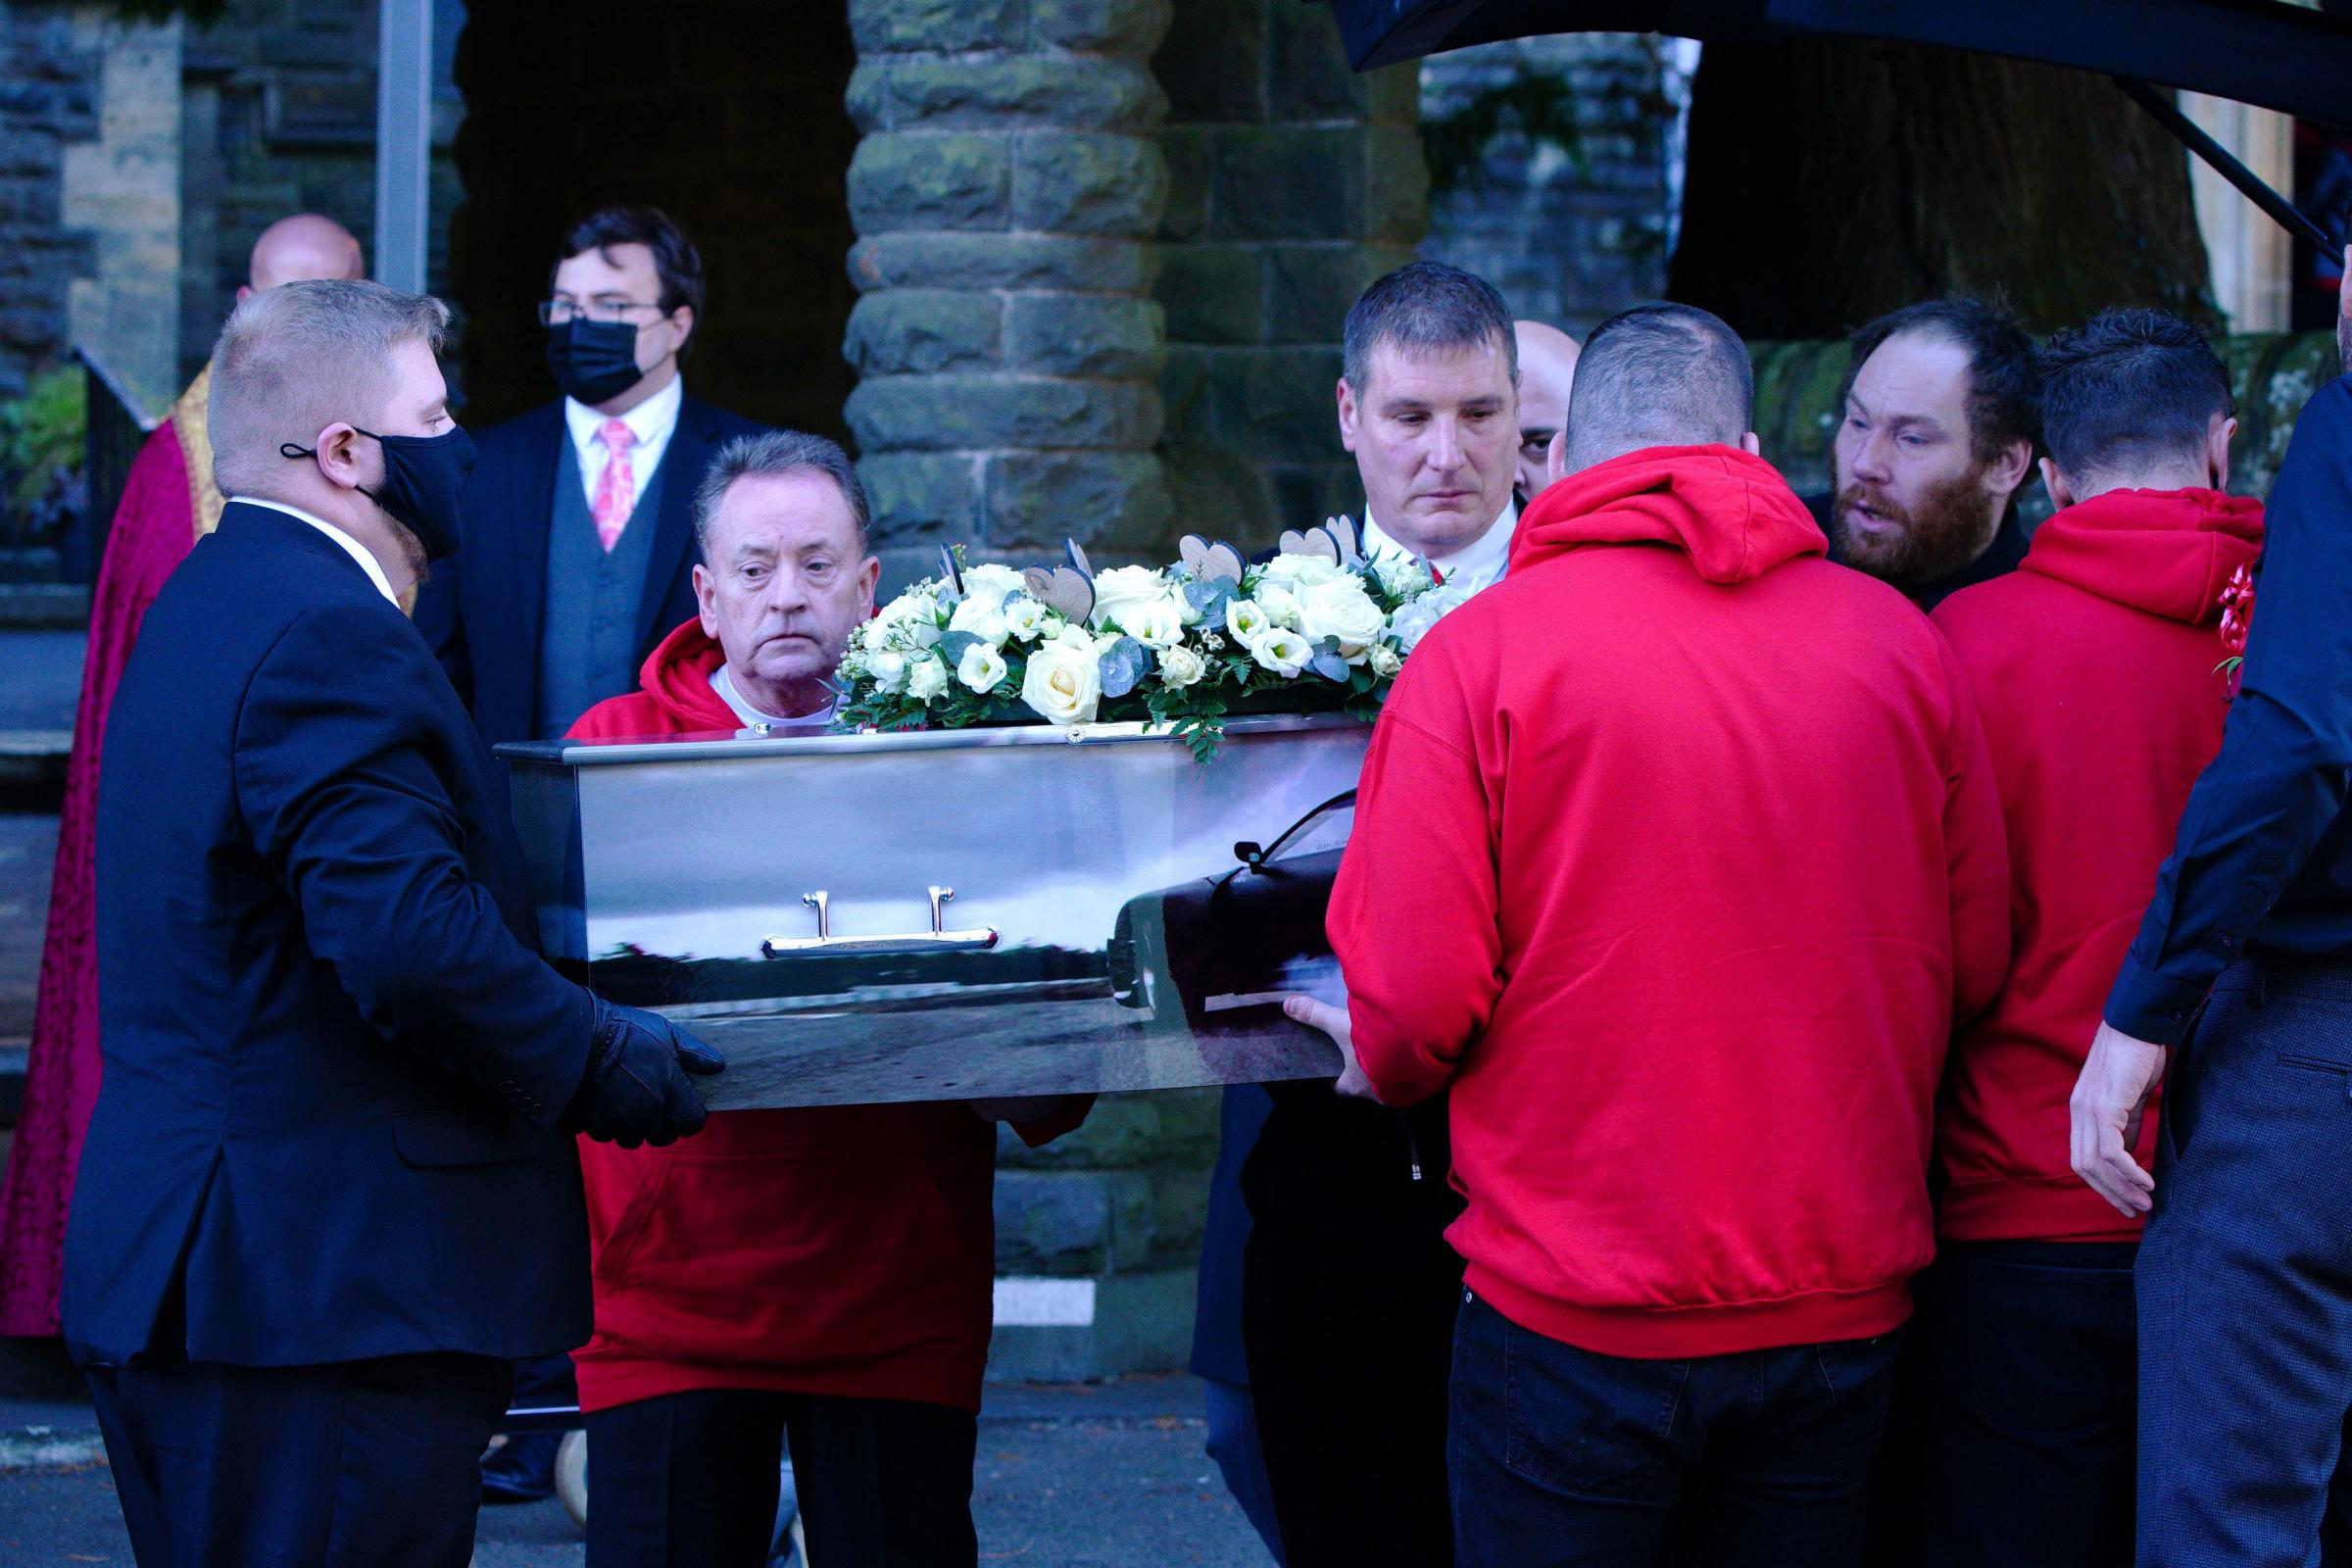 Car procession and mourners in red at funeral for boy mauled by dog Irvine Times